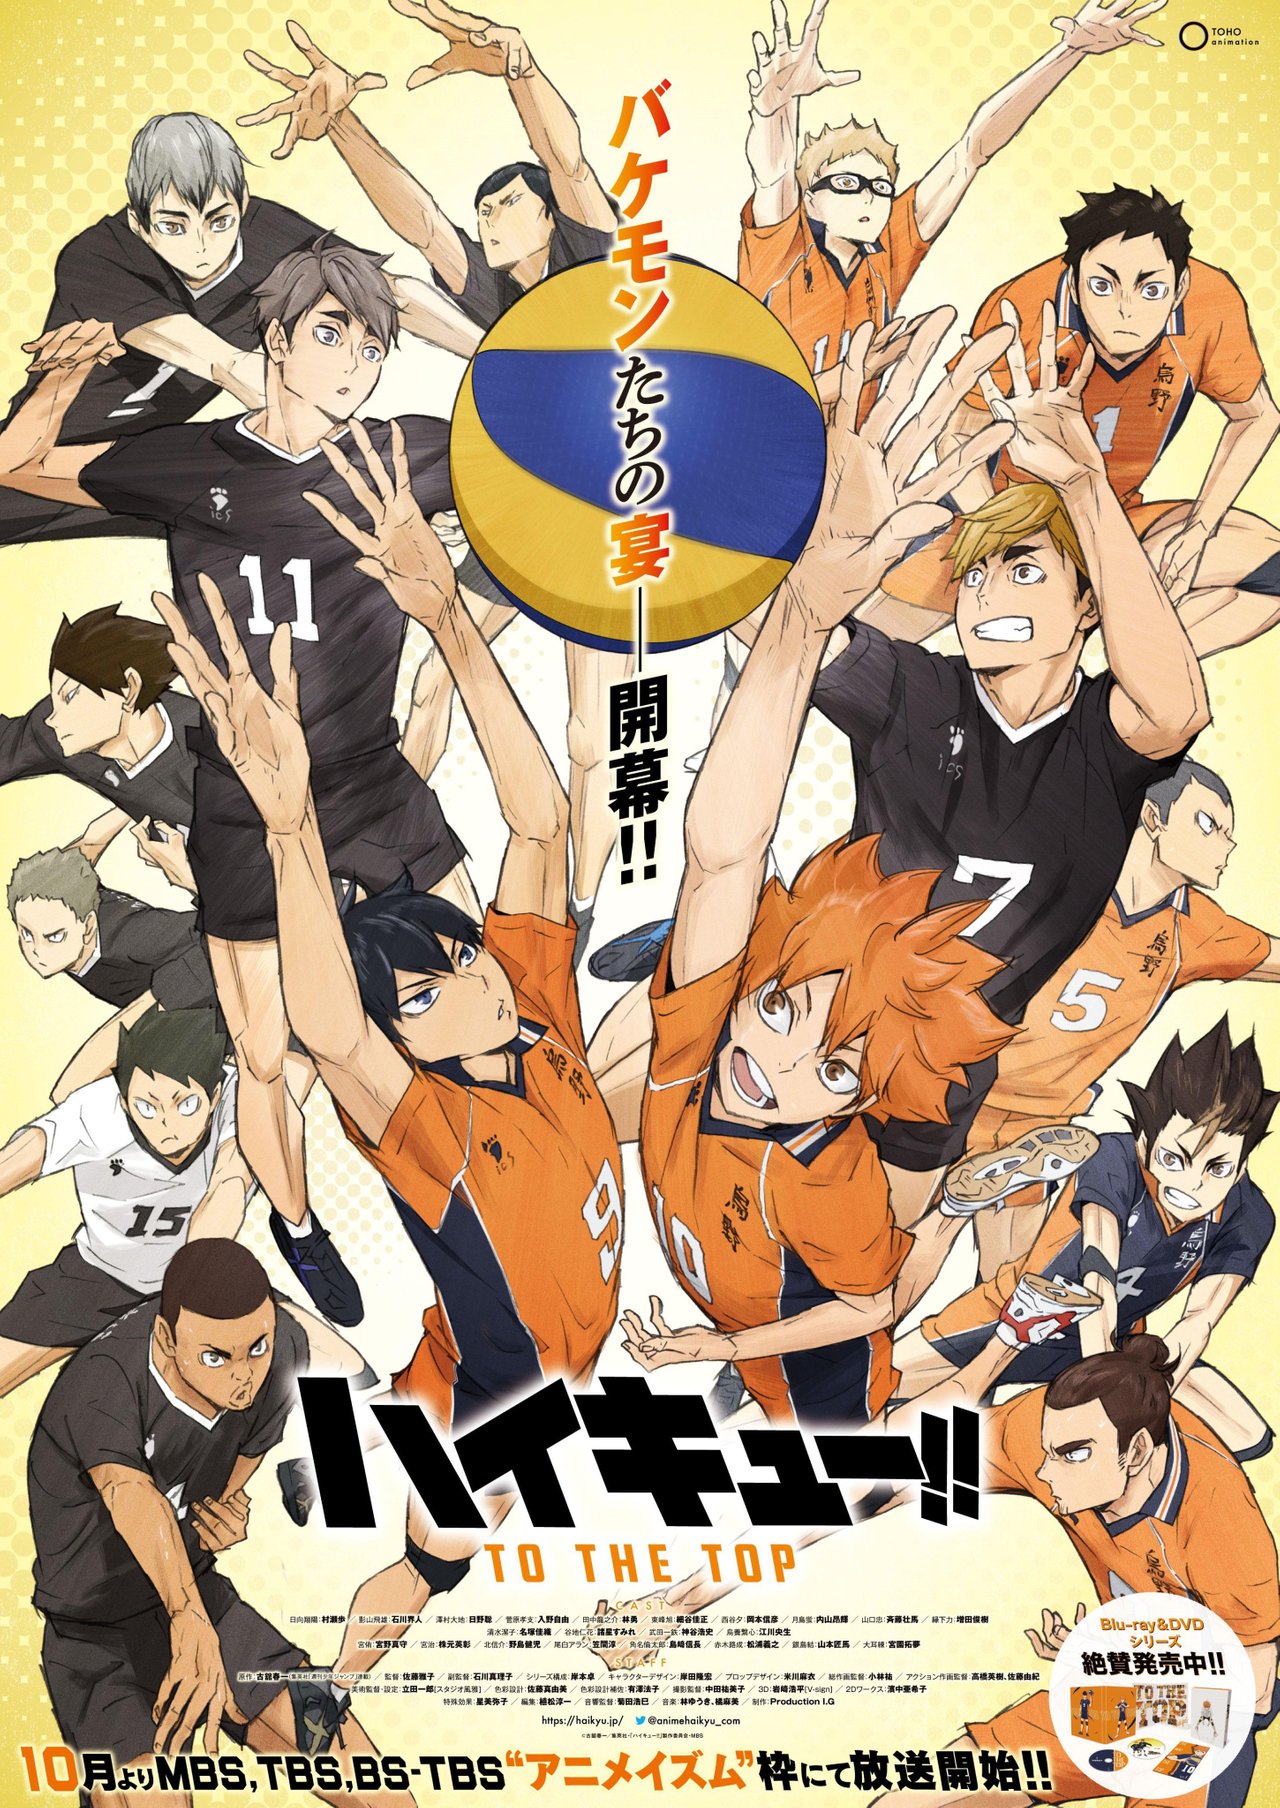 What to Expect From Season 5 of Haikyuu!!